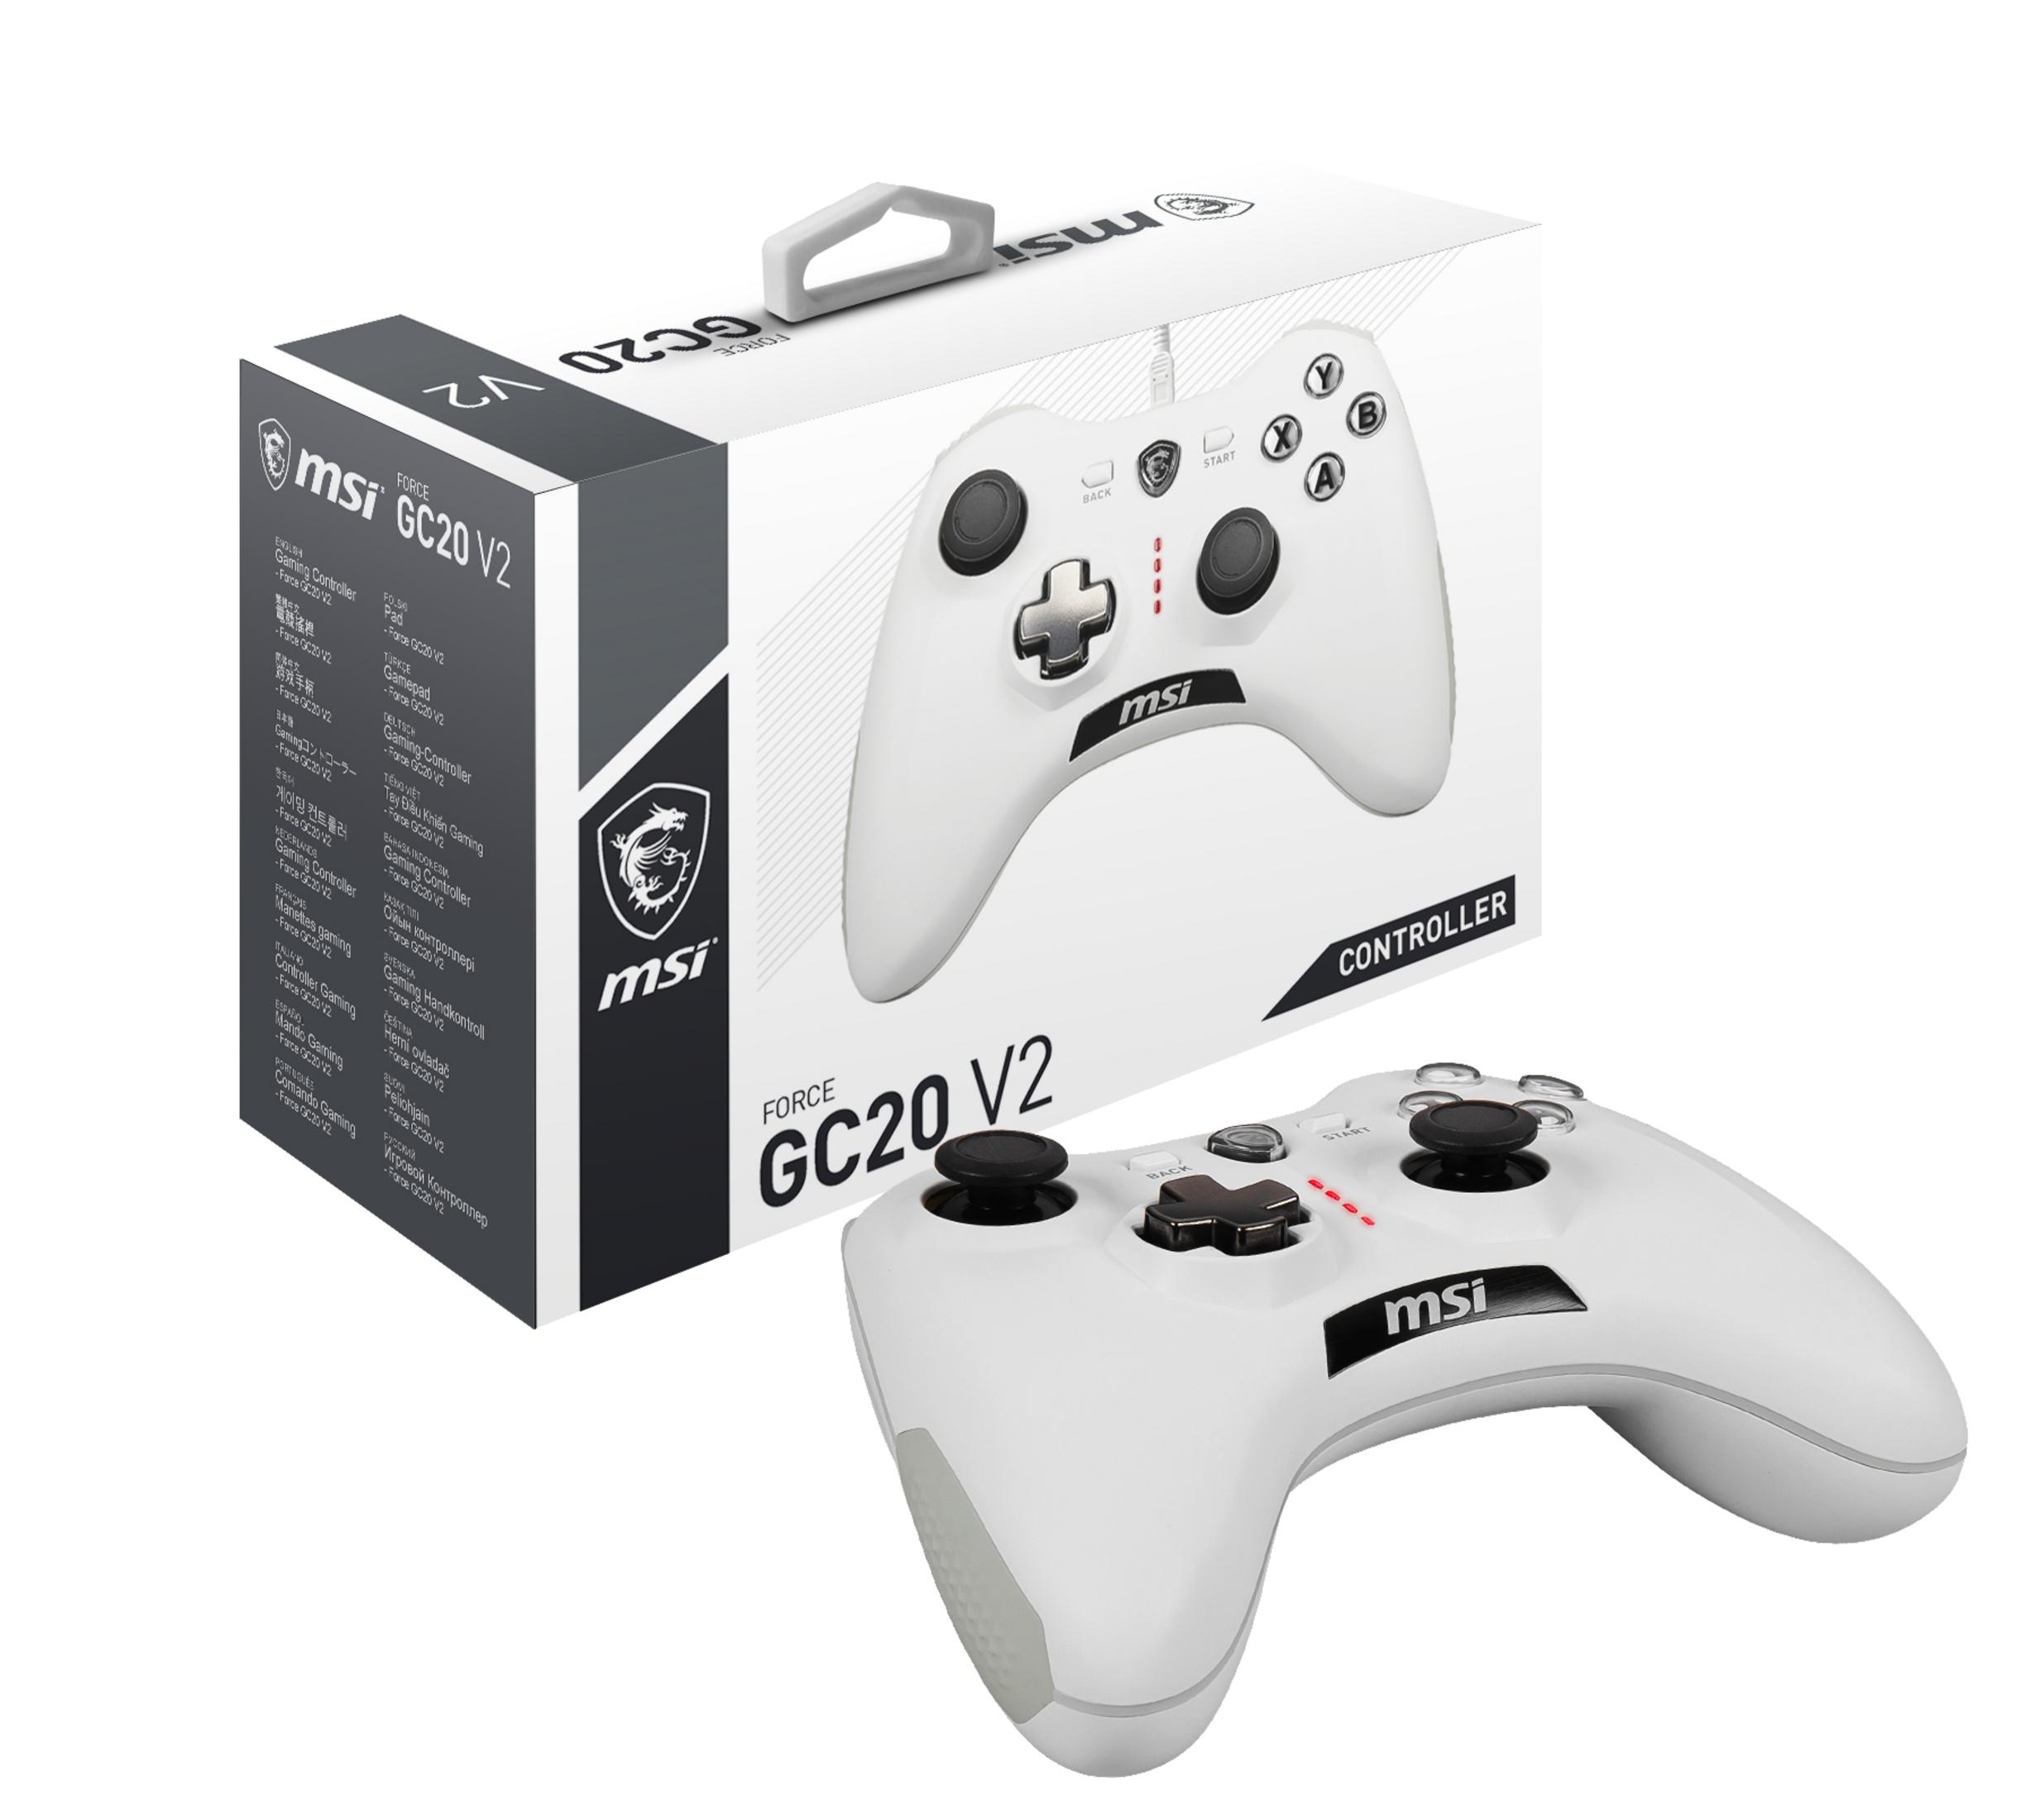 FORCE Weiß MSI Game CONTROLLER GC20 GAME Controller S10-04G0020-EC4 V2